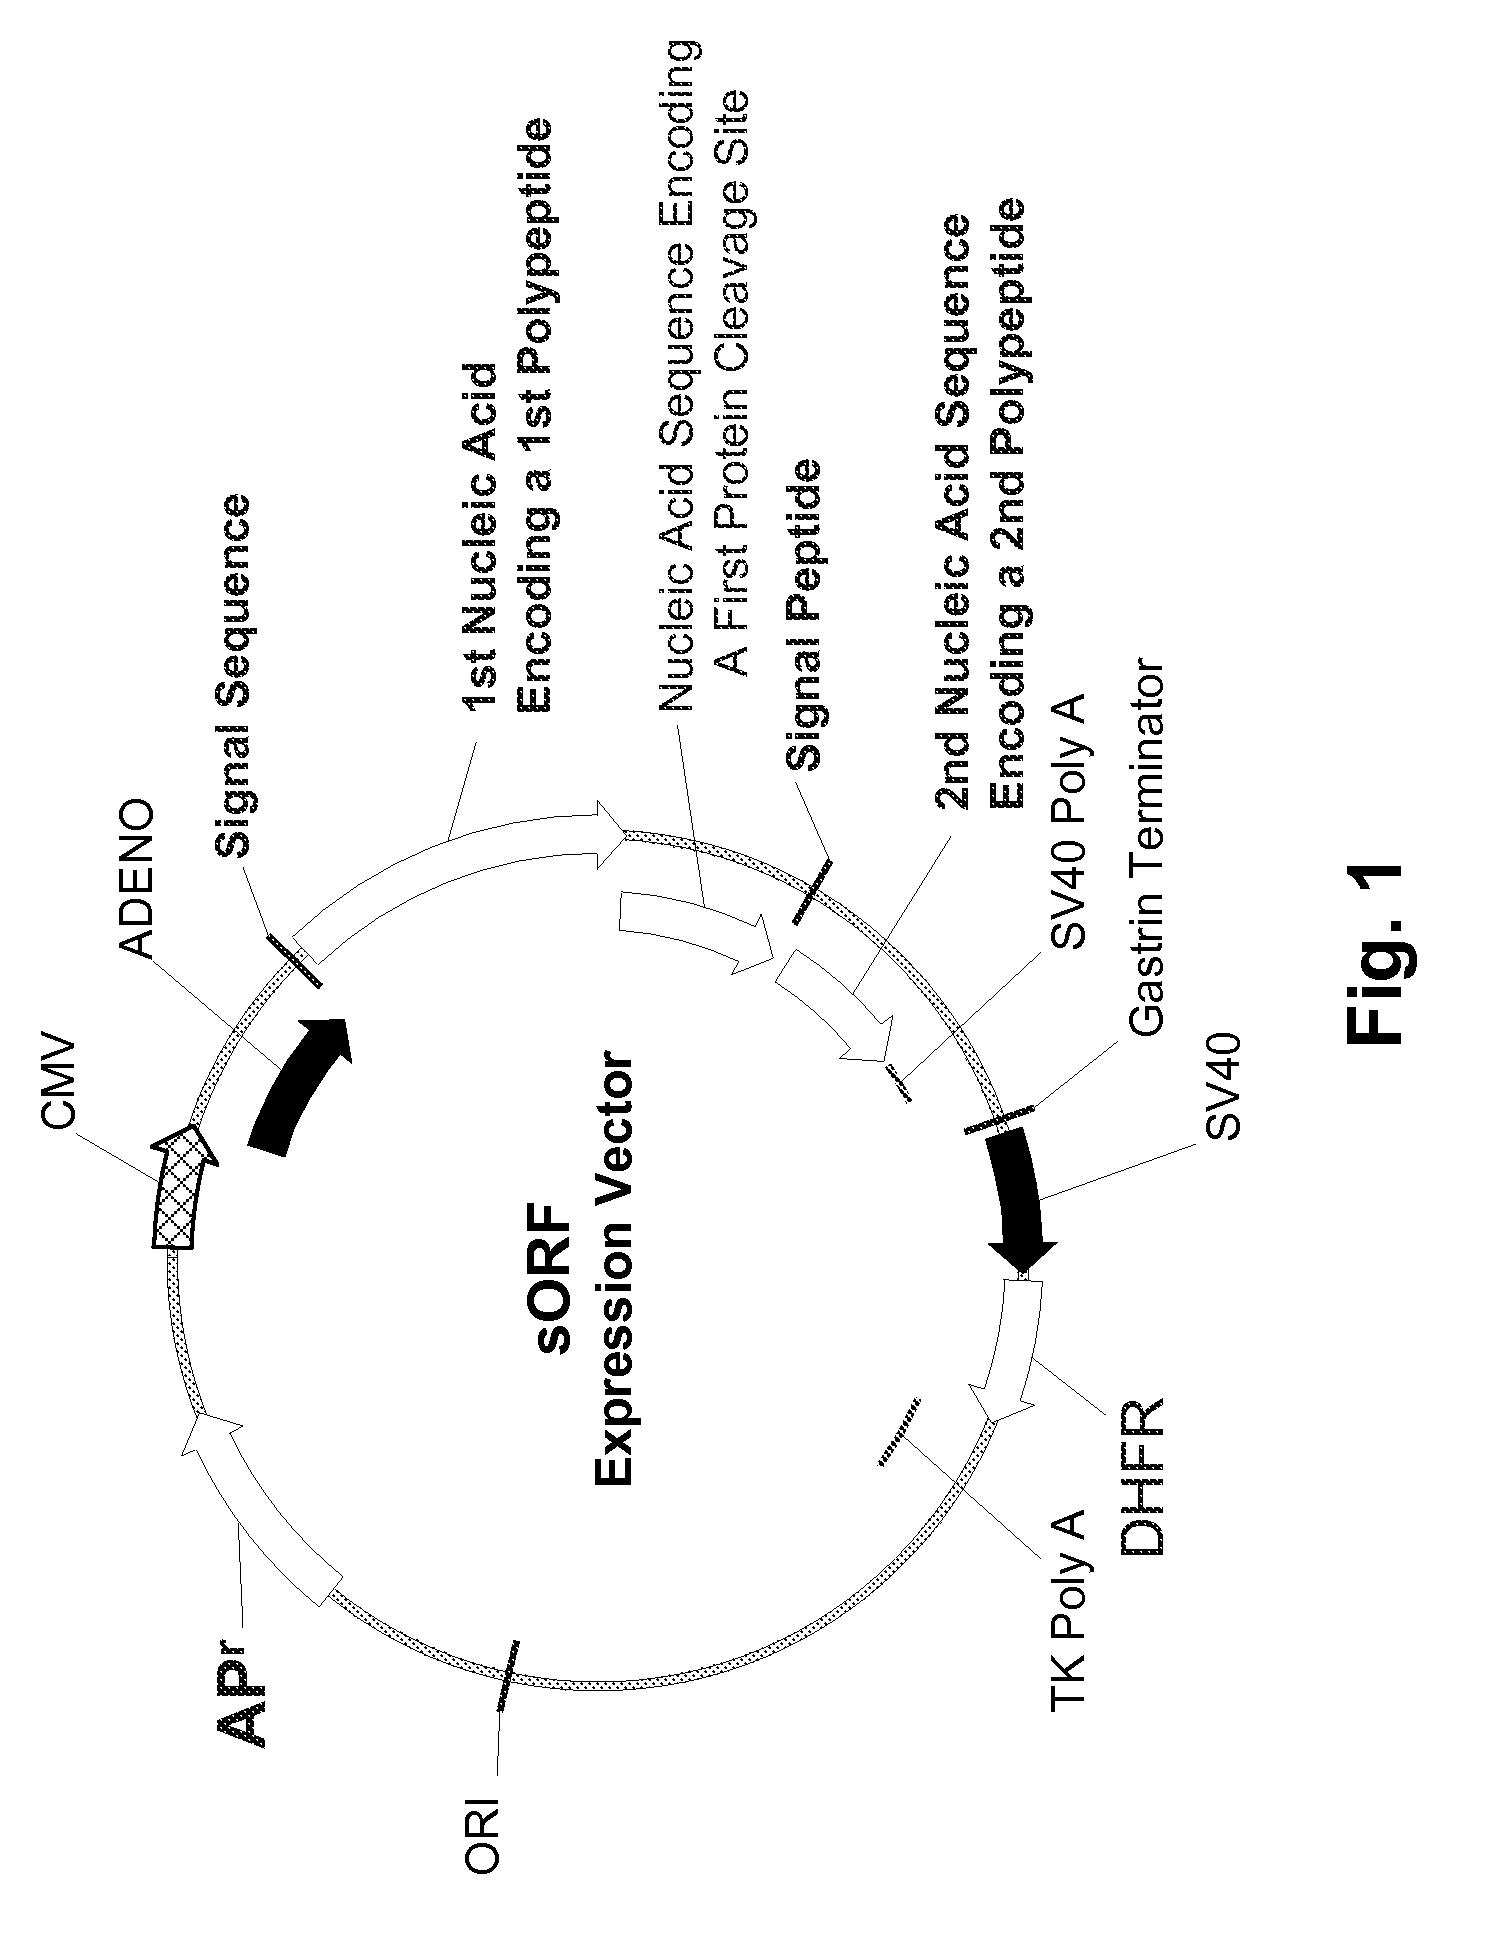 Multiple Gene Expression including sORF Constructs and Methods with Polyproteins, Pro-Proteins, and Proteolysis